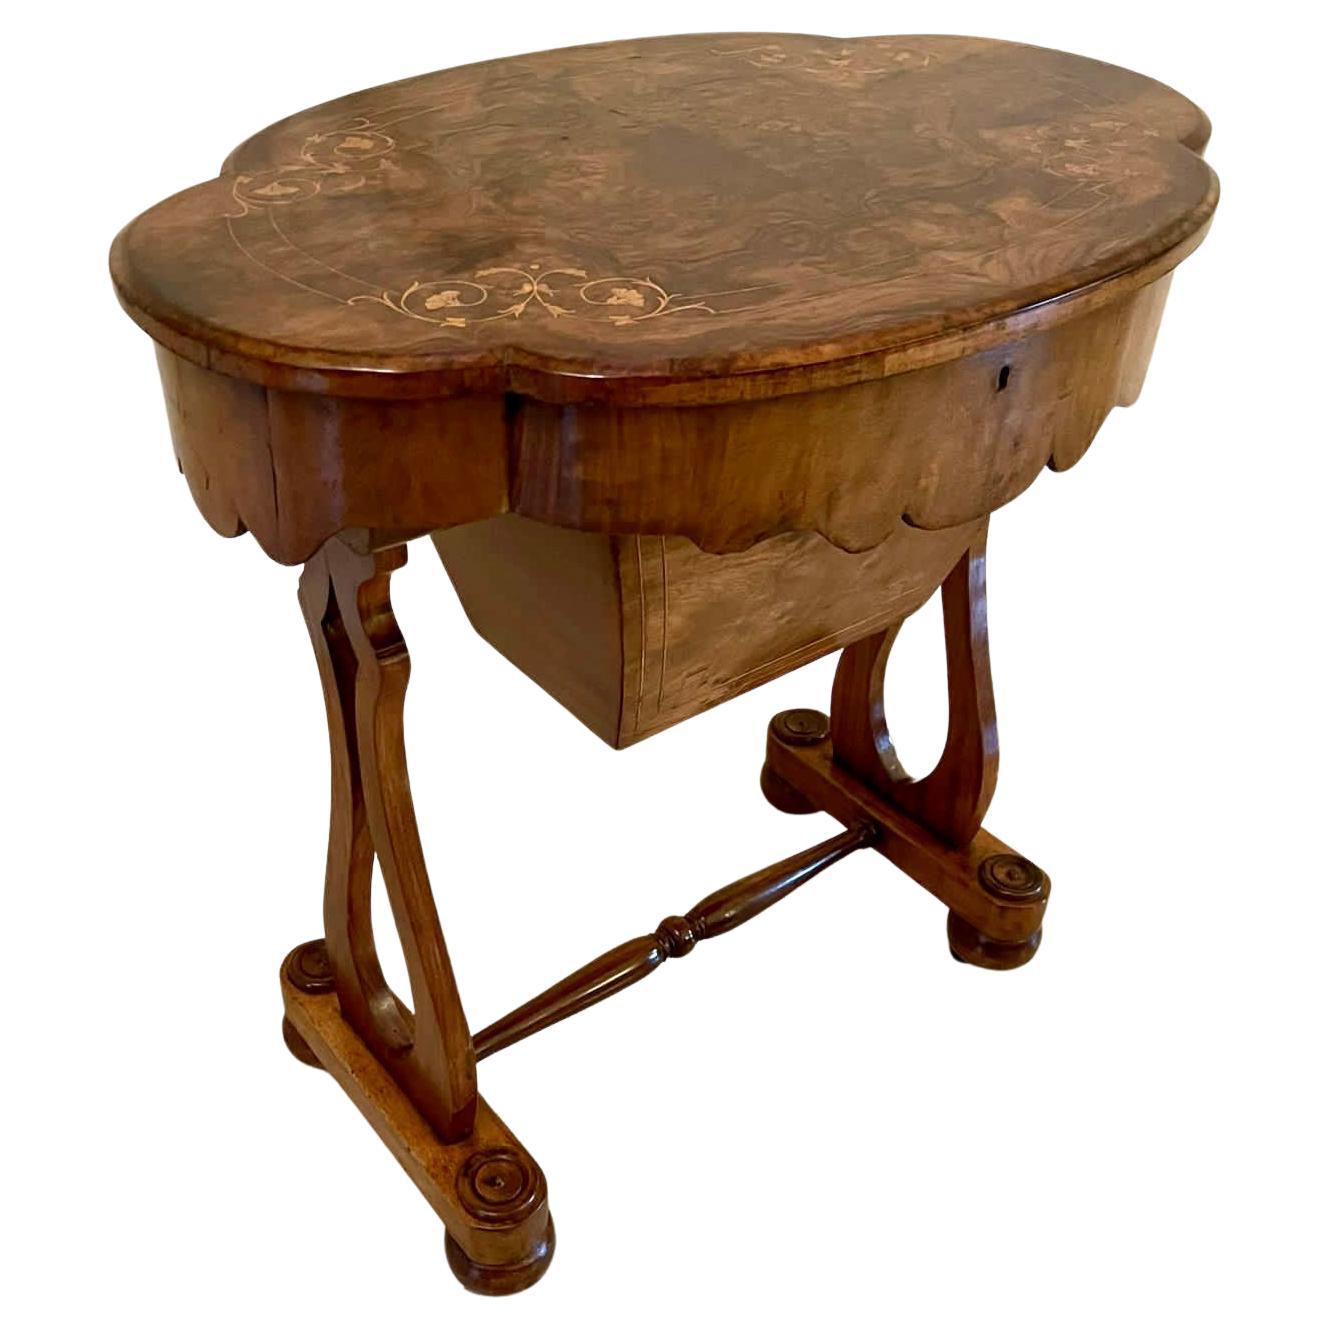 Quality Antique Victorian Burr Walnut Inlaid Work Table For Sale